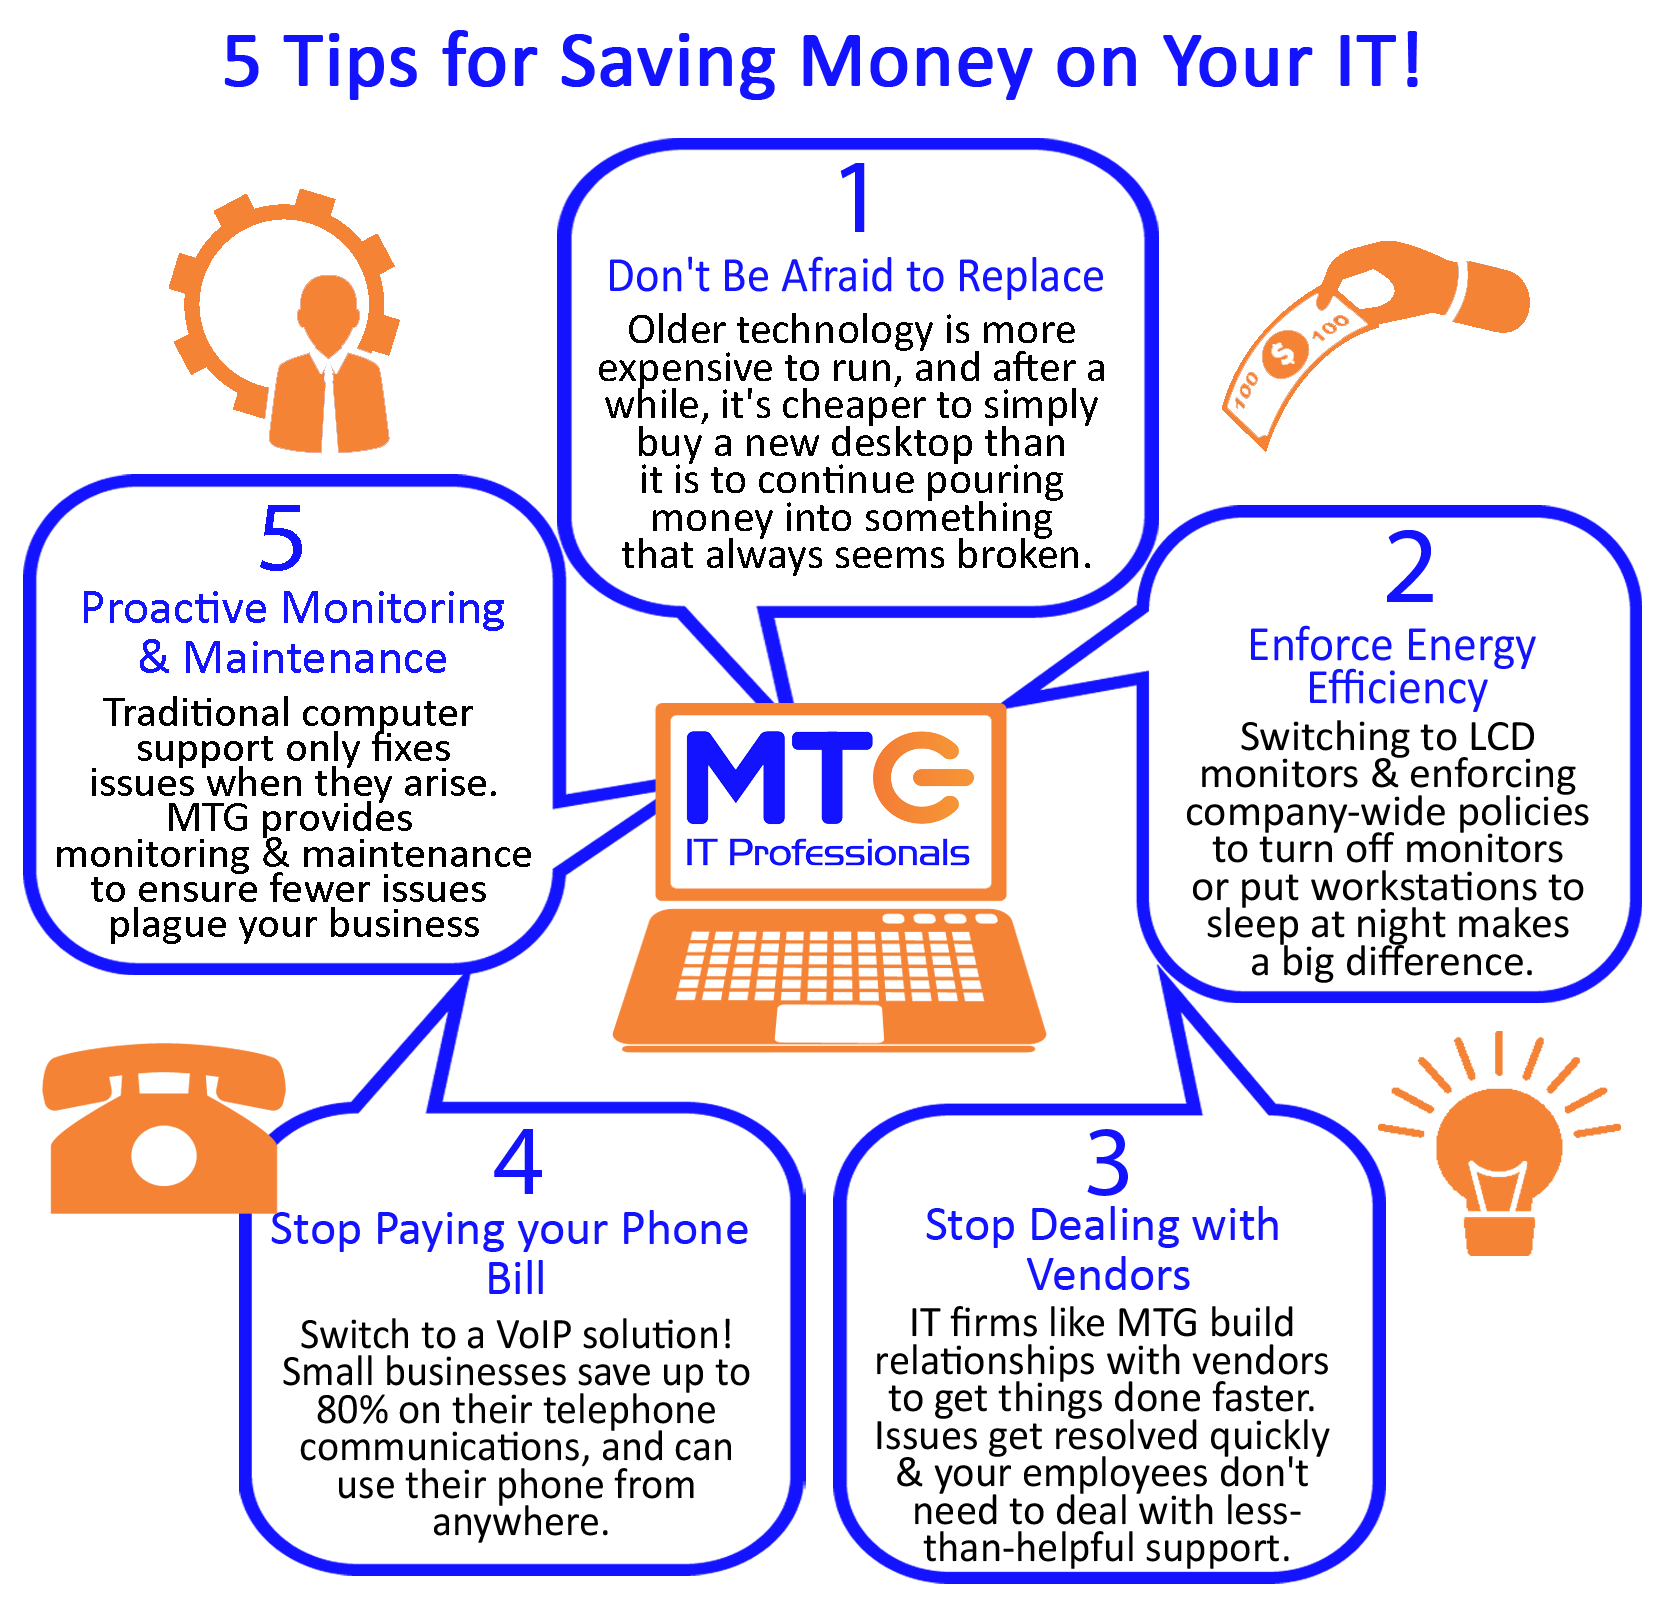 9 Tips to Help Your Business Save Money on IT - Bensalem